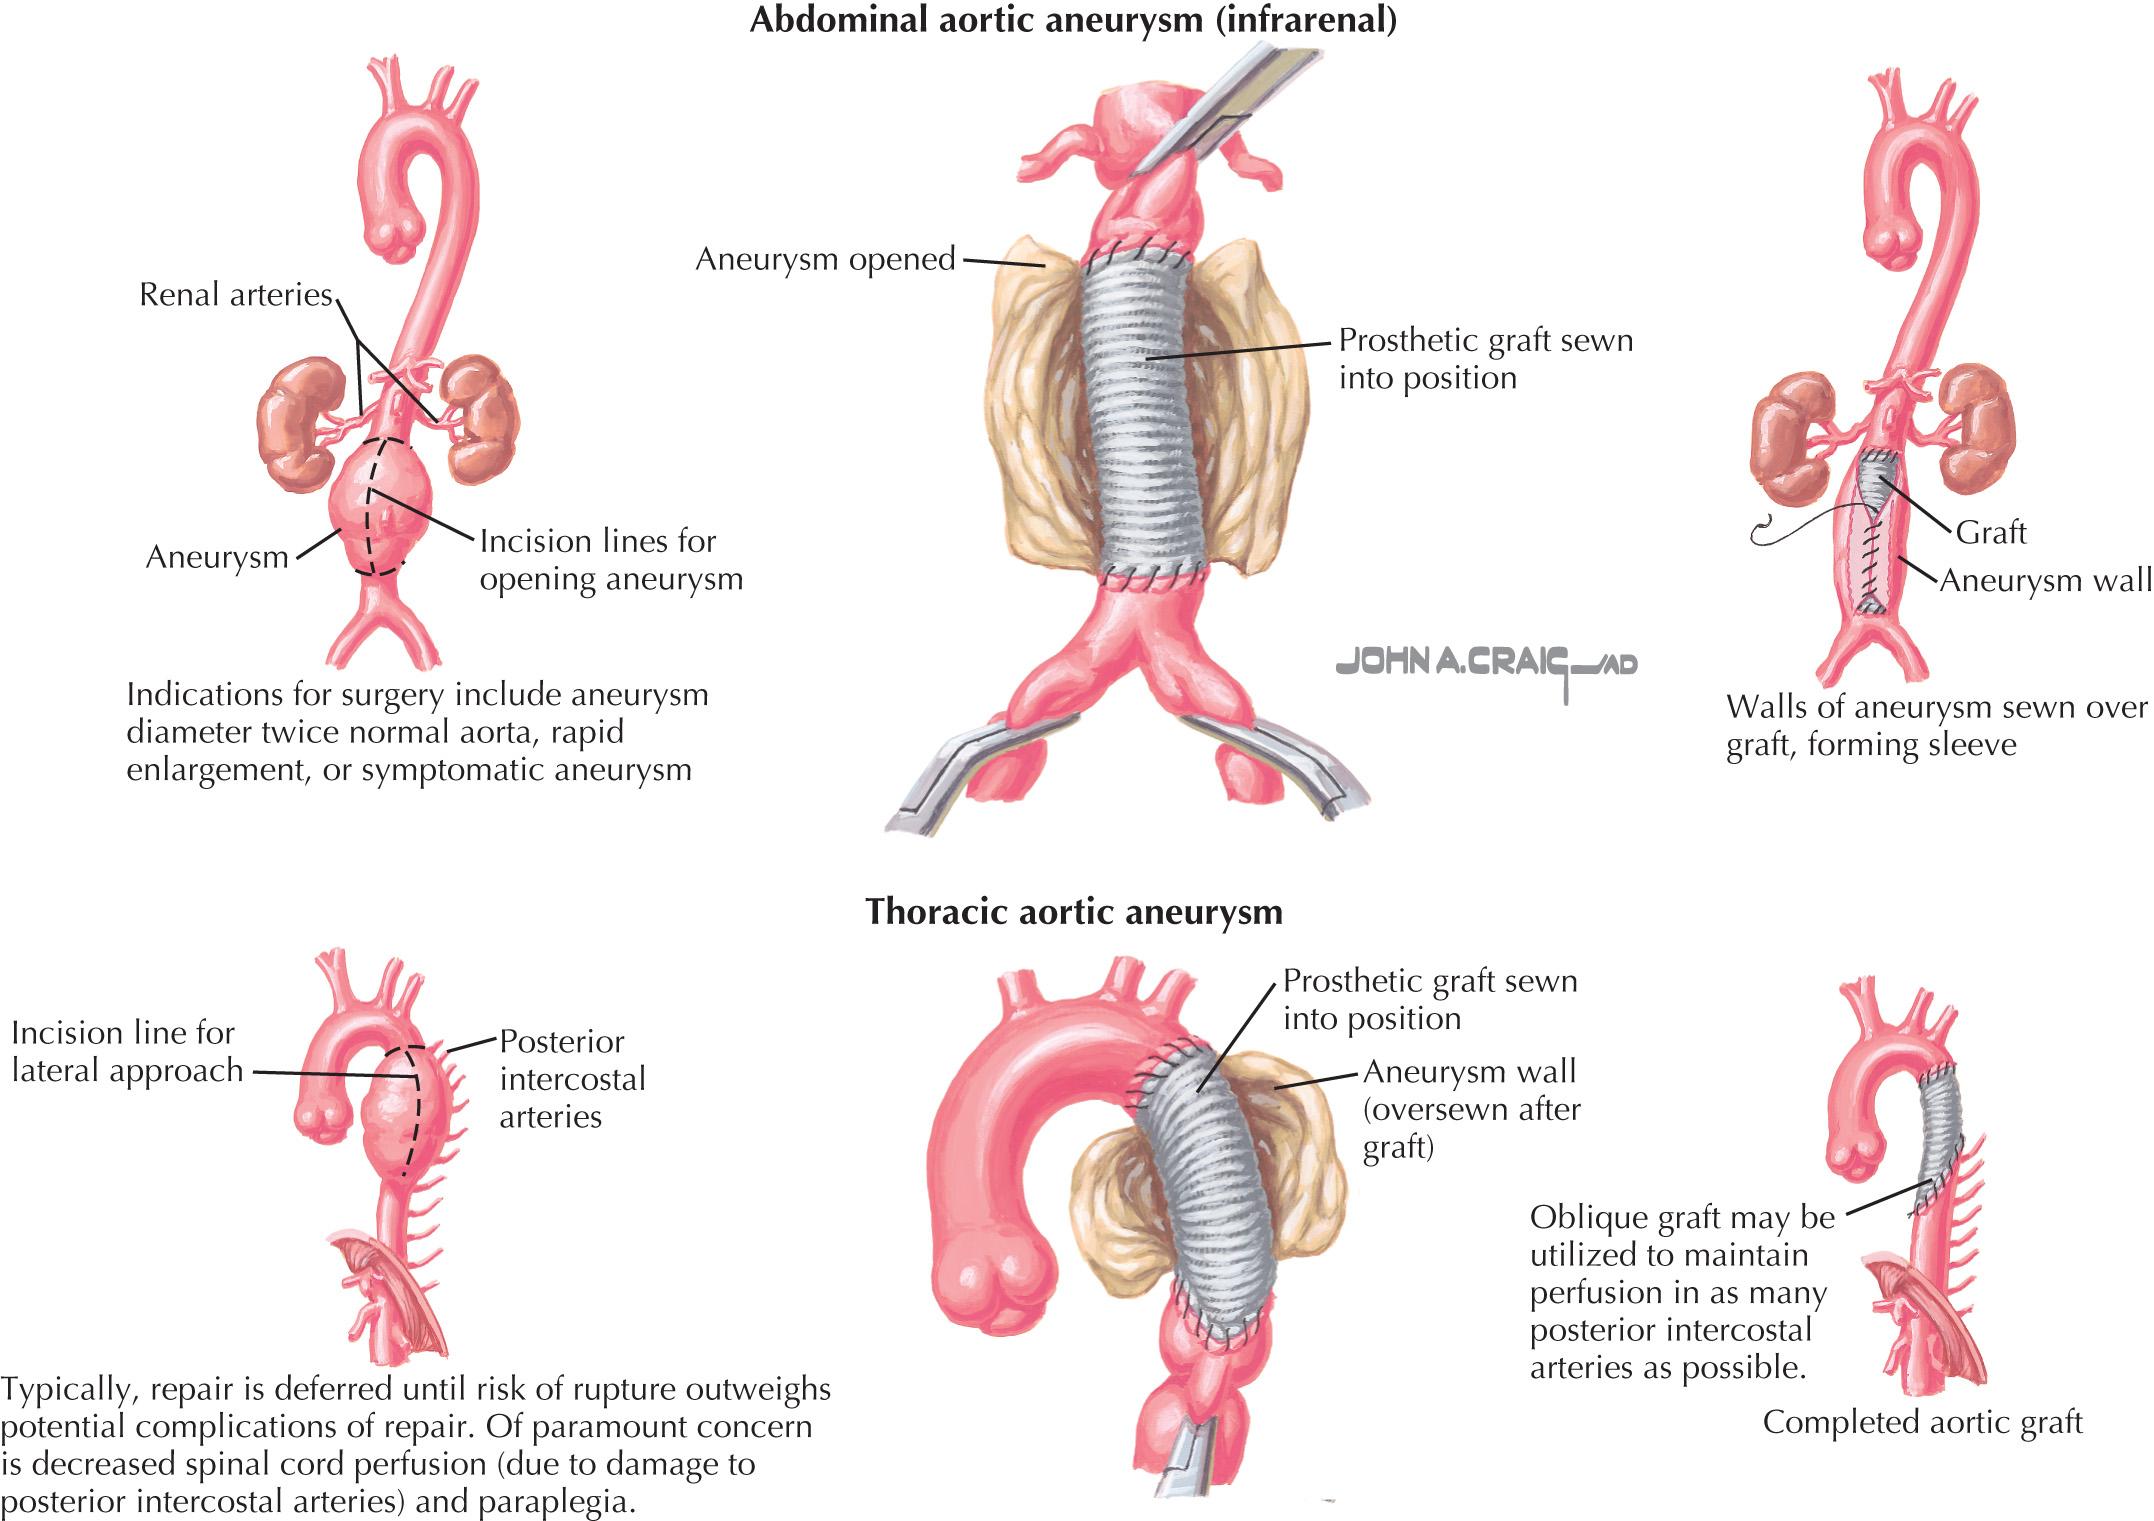 FIG 62.1, Surgical Management of Aortic Aneurysms.